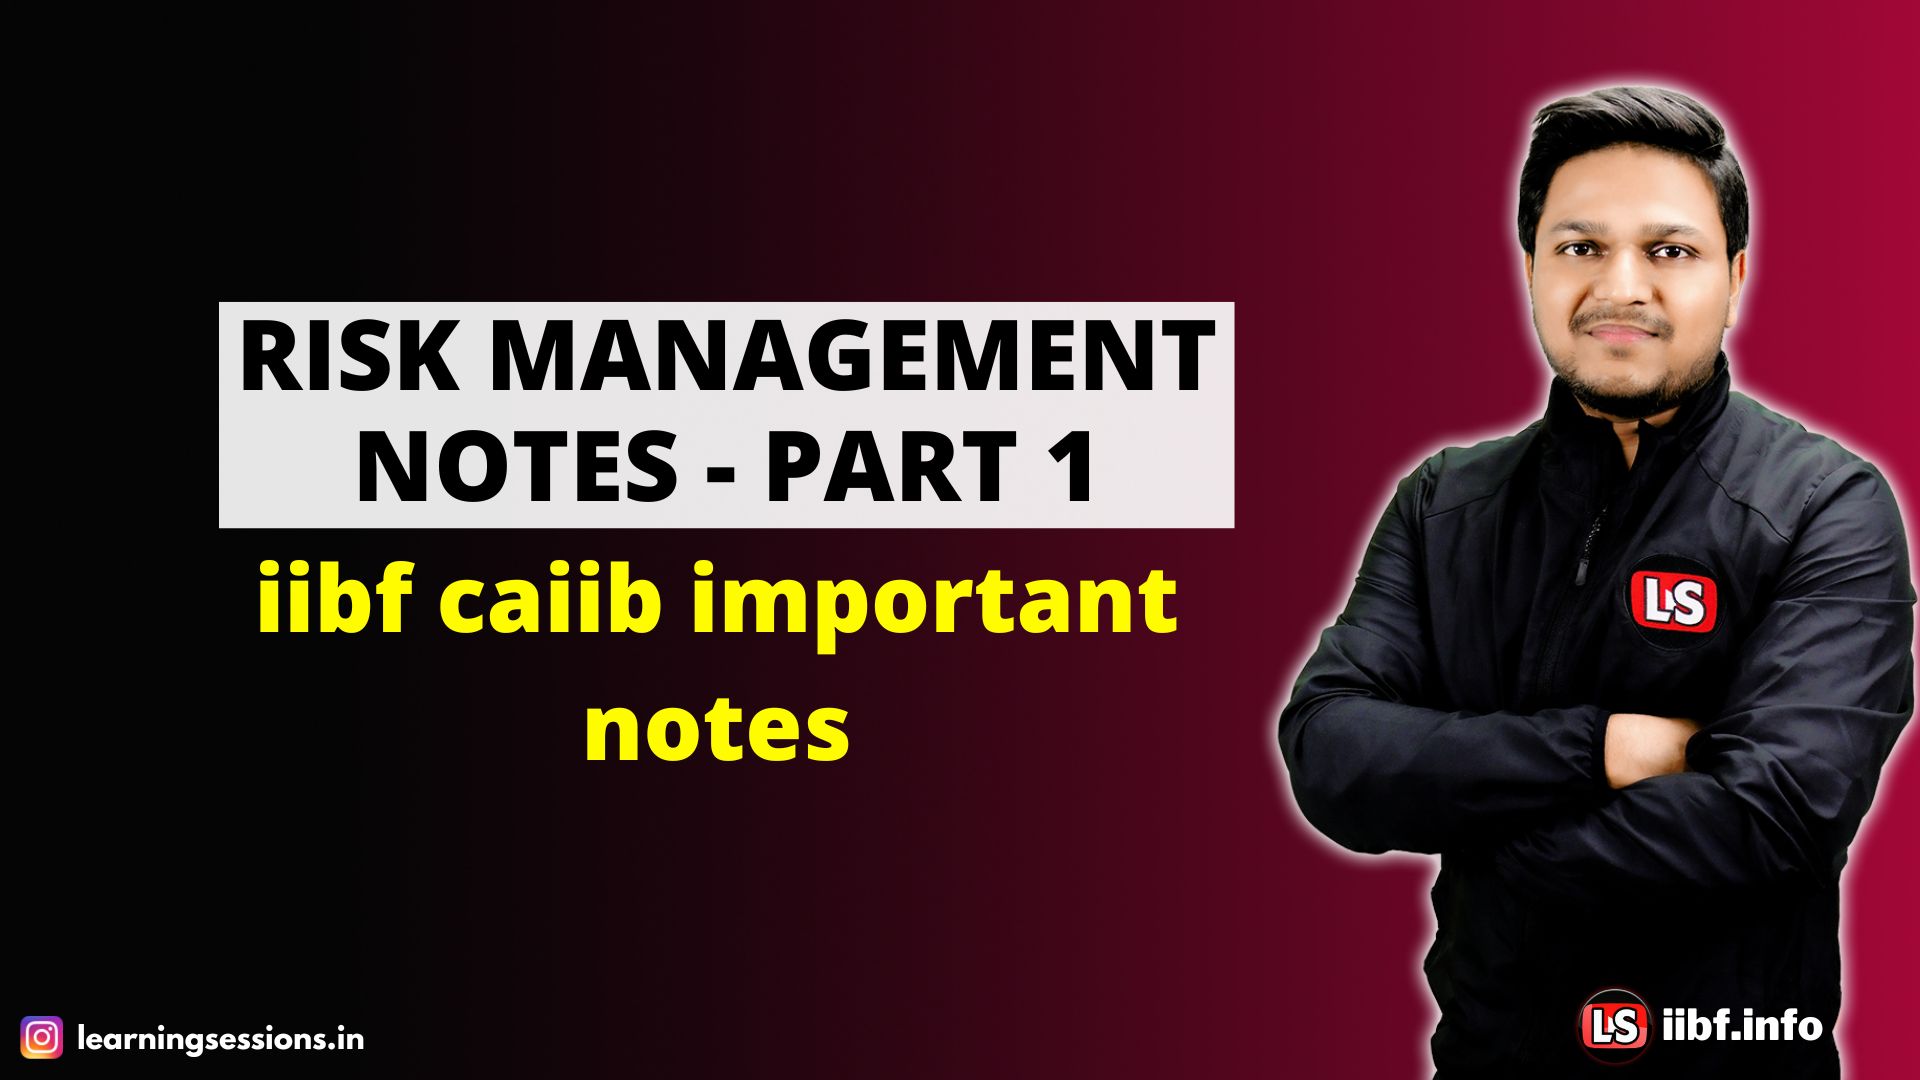 IIBF CAIIB & TIRM IMPORTANT NOTES | RISK MANAGEMENT NOTES - PART 1 | 2022-23 EXAMS